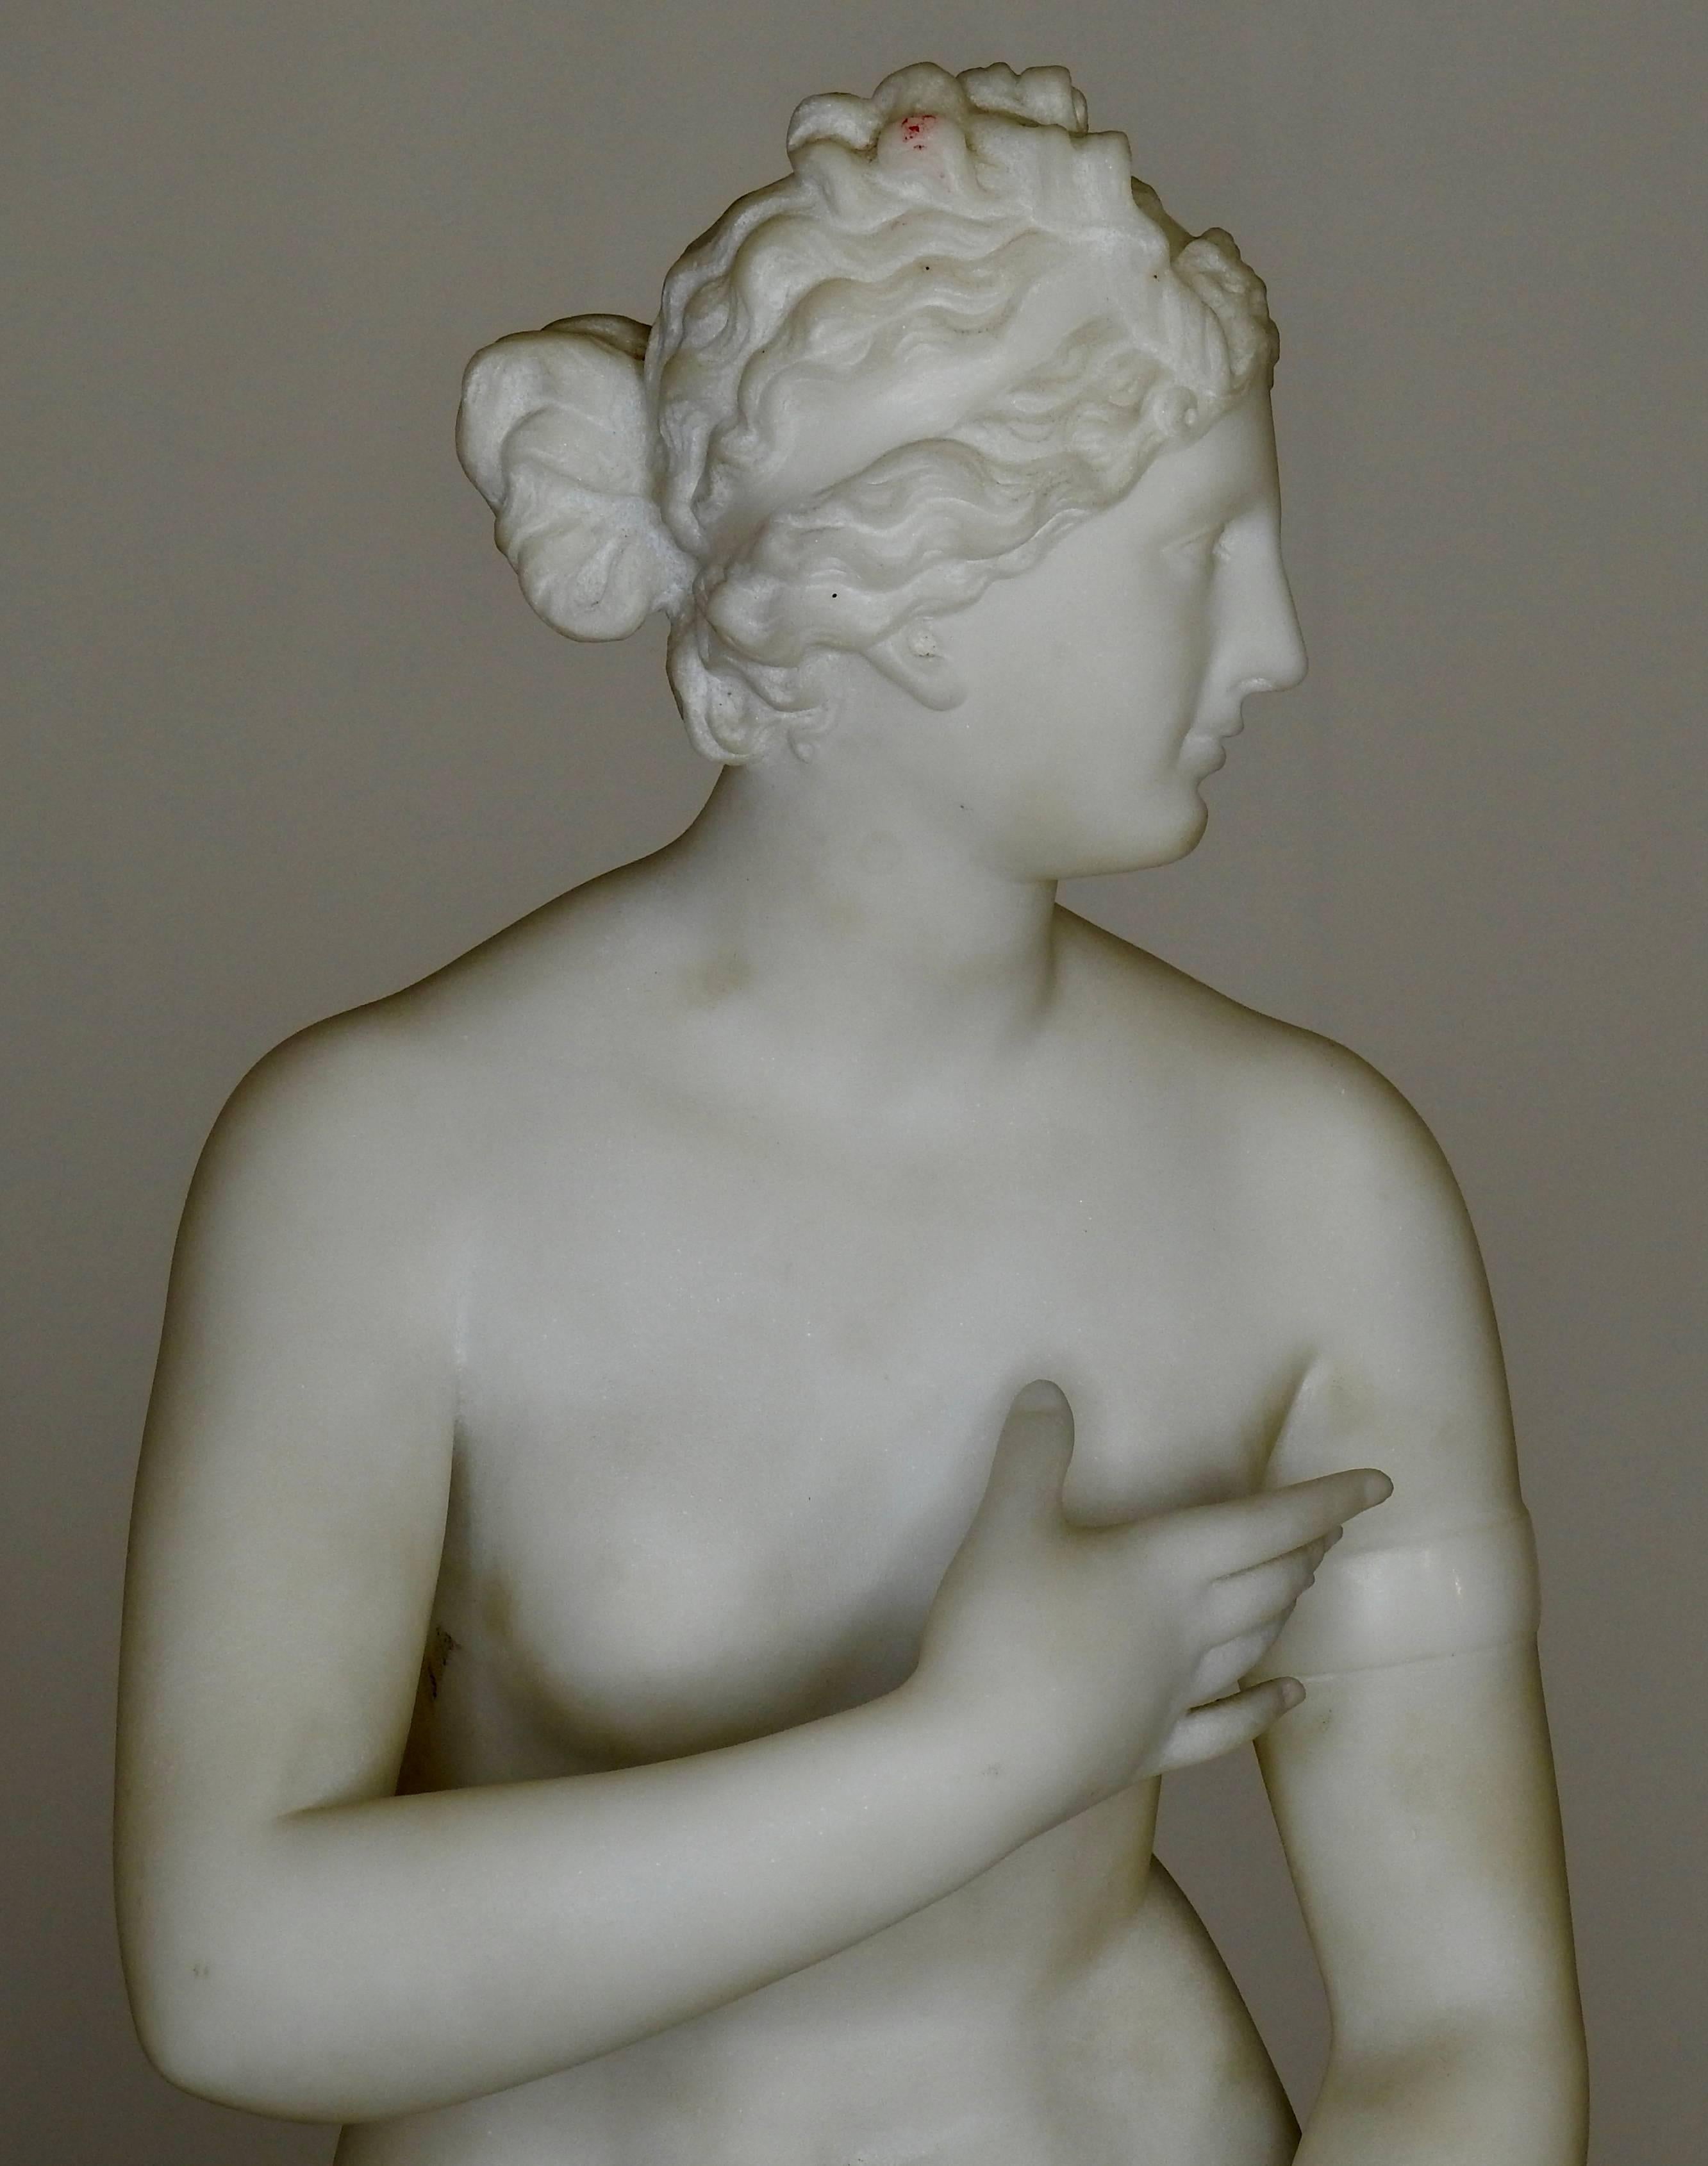 Graceful nude lady from the Art Nouveau era made of carved white marble. A pair of angelic cherubs ride a fish at her feet with a log poised behind her. Index finger on her left hand is broken off.